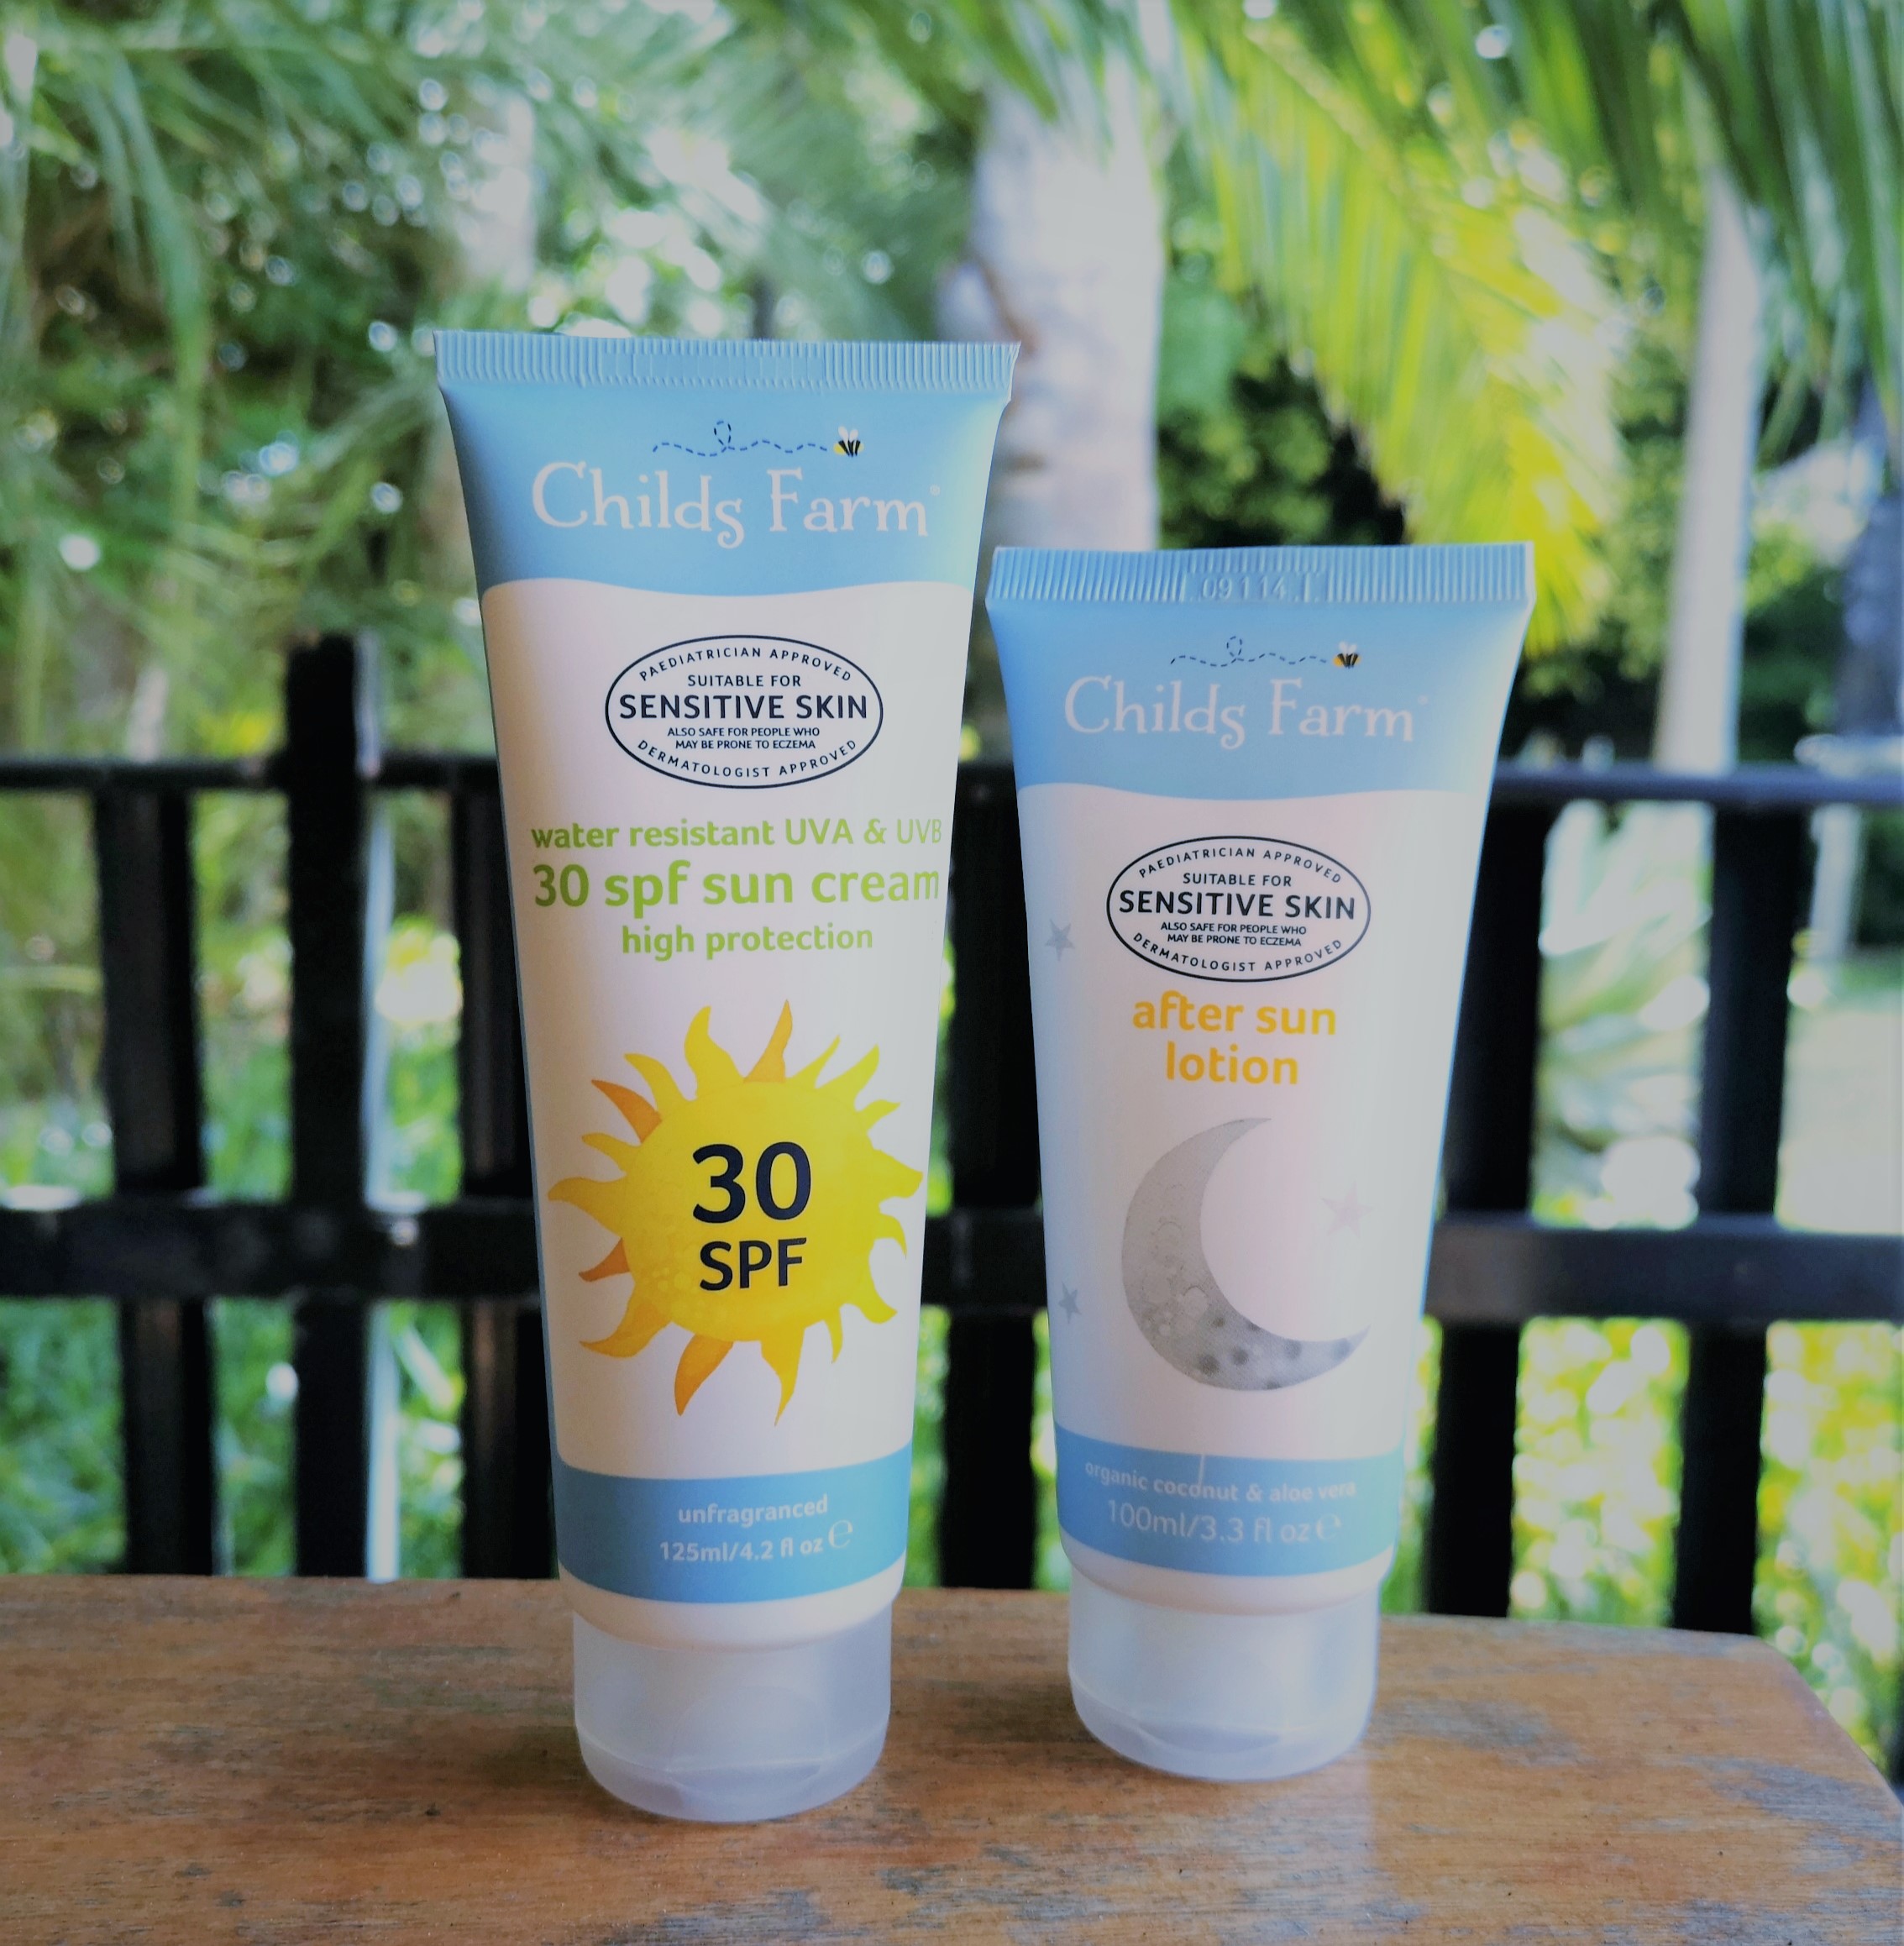 Superb Sun Care from Childs Farm